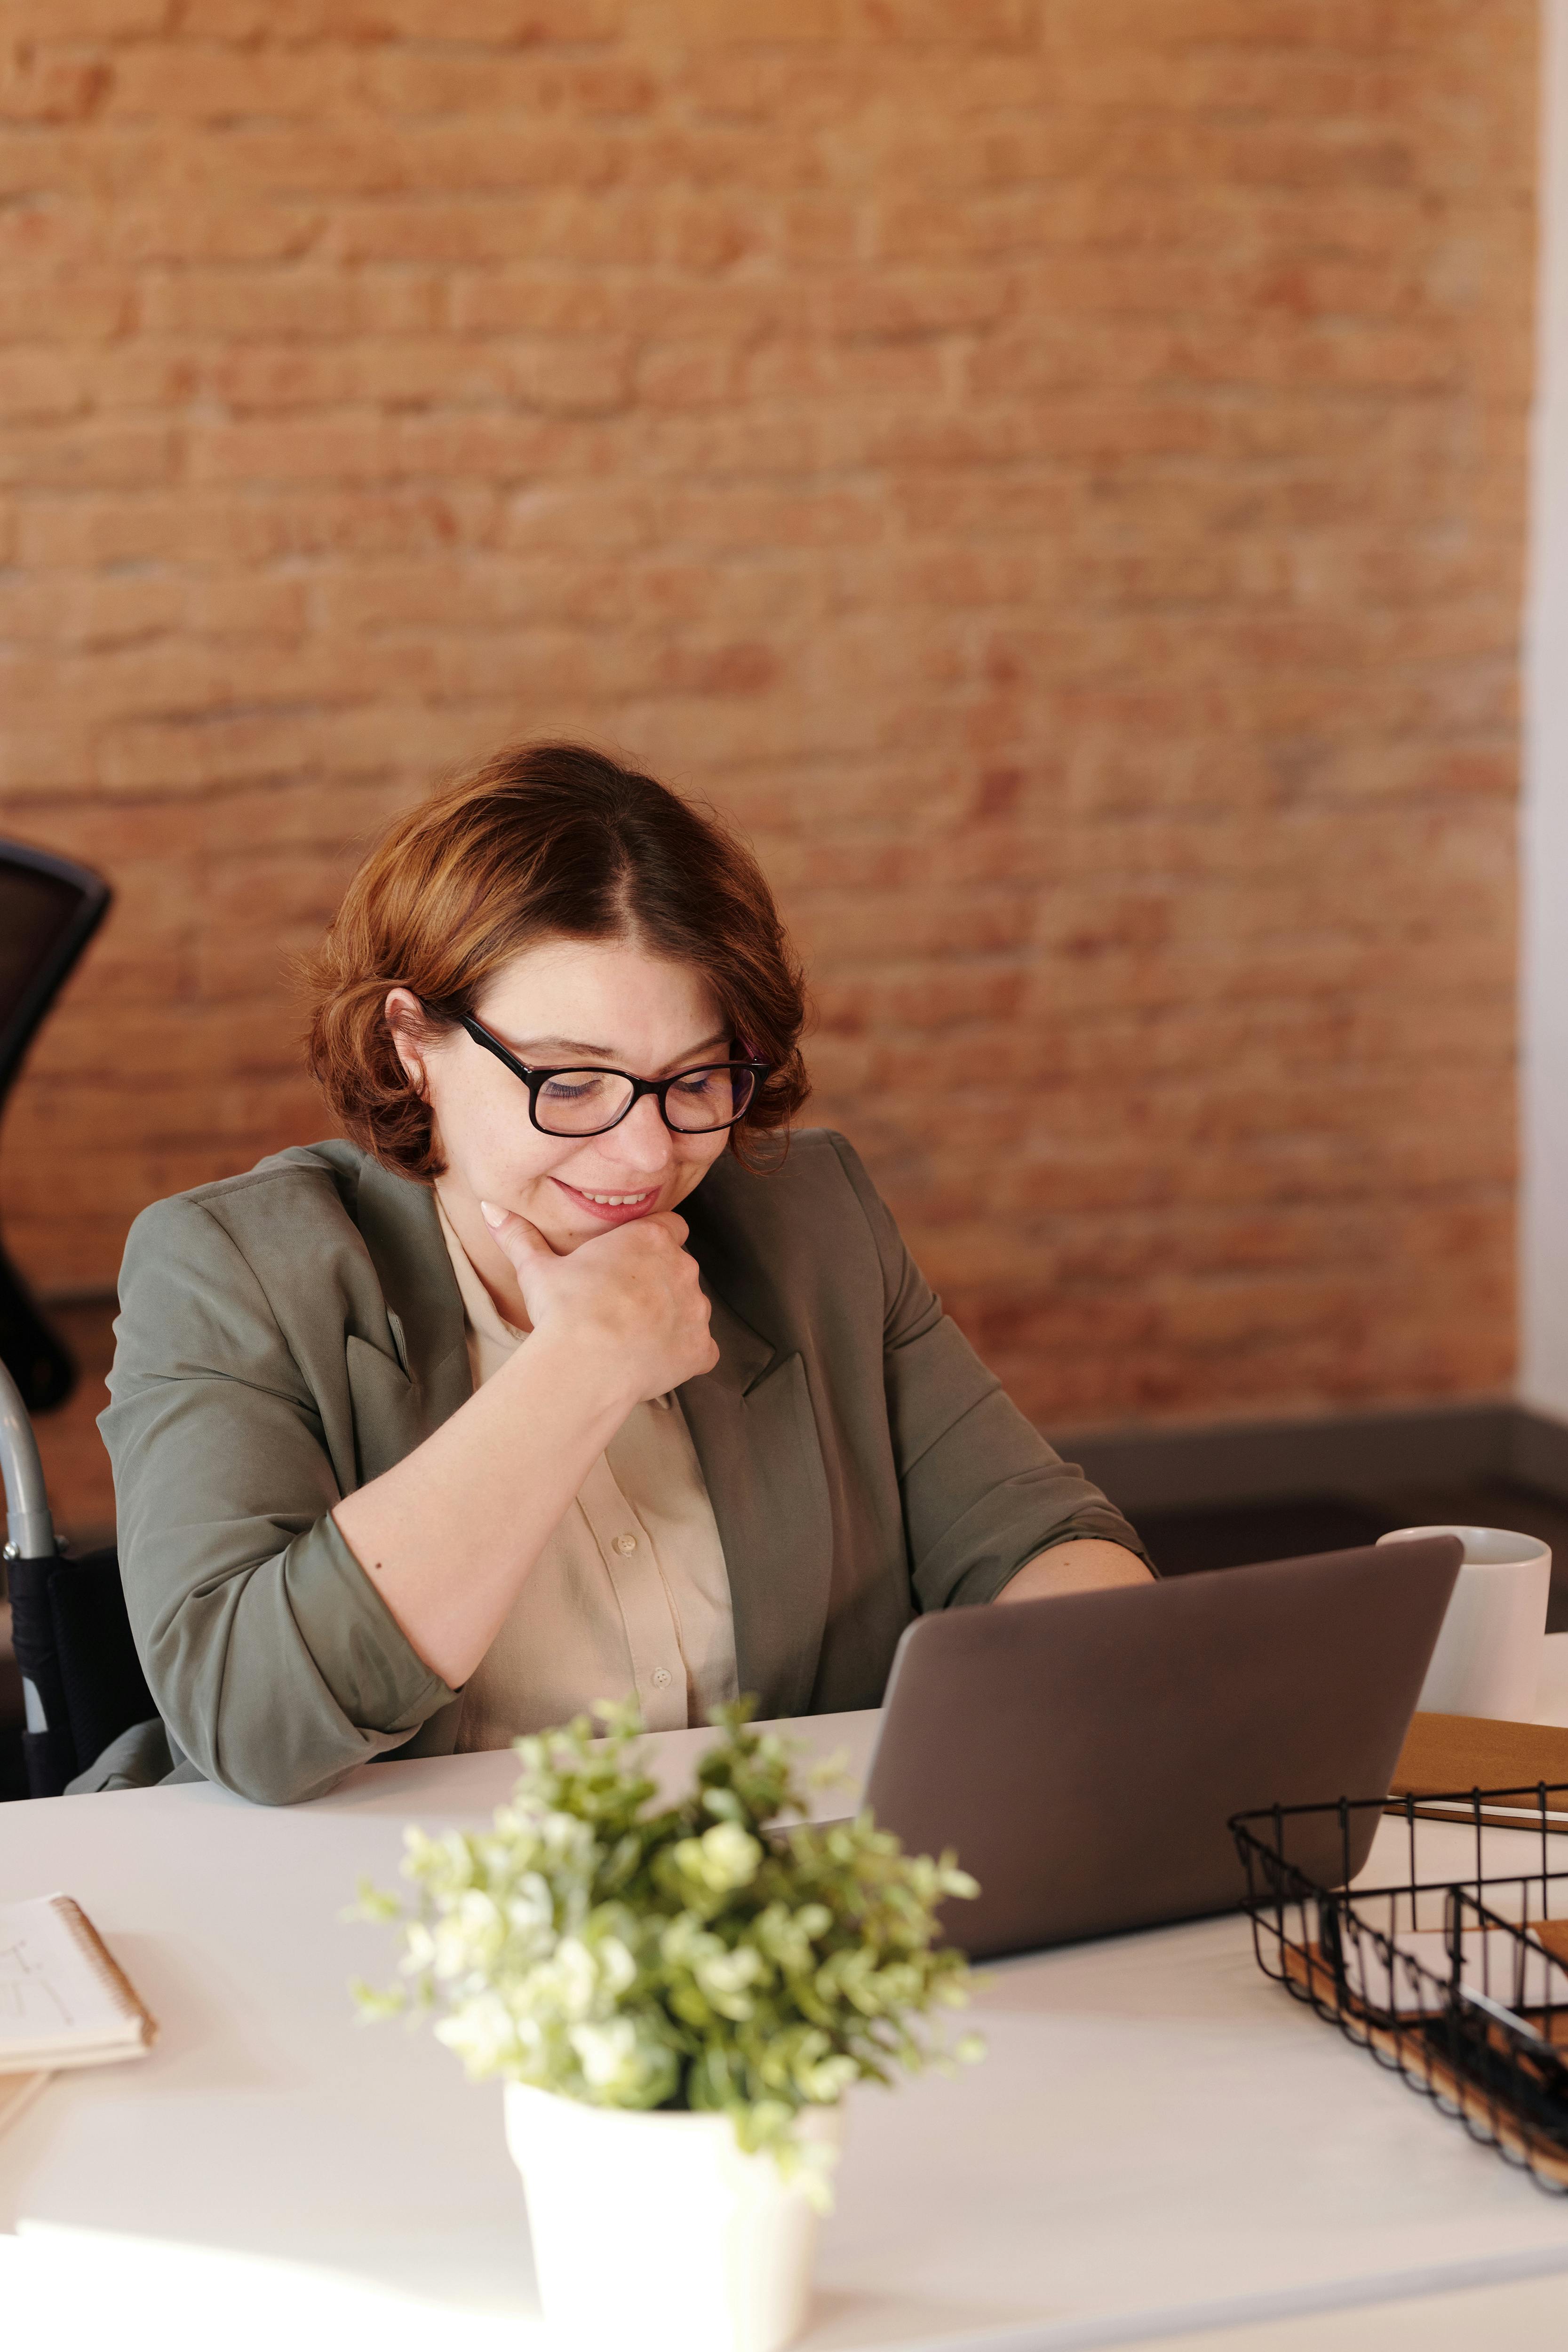 photo of woman smiling while using laptop